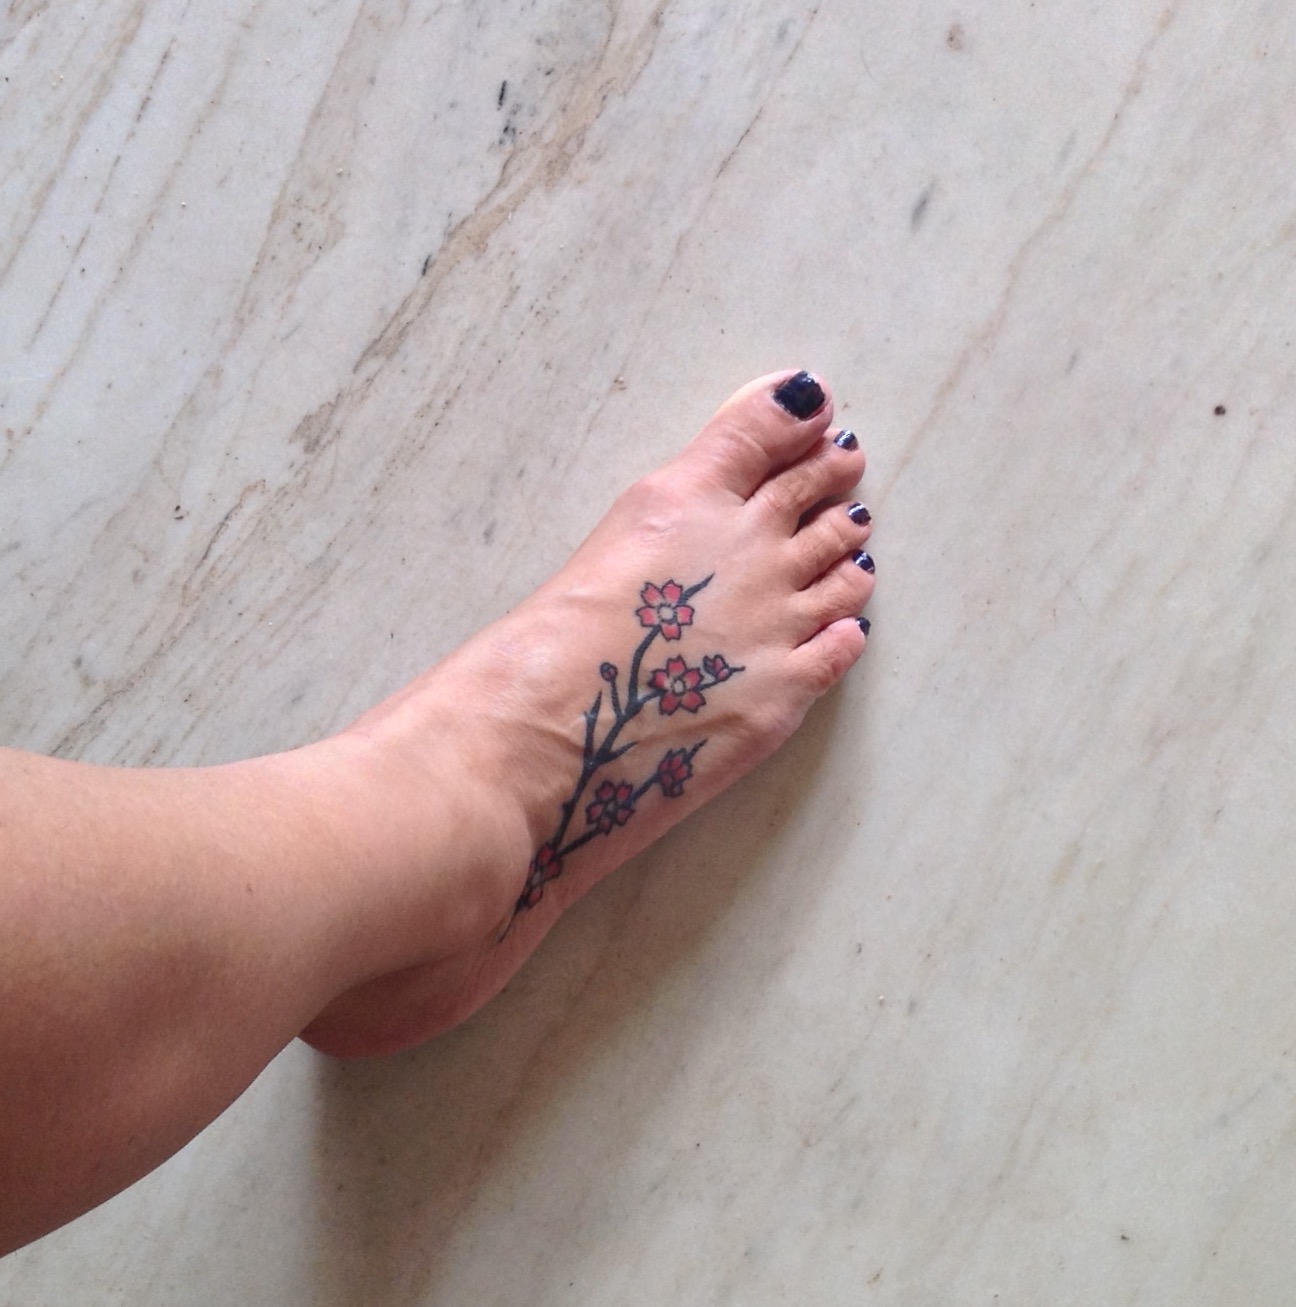 Butterfly tattoo on ankle design - TatHubs | Butterfly foot tattoo, Tattoo  designs foot, Butterfly tattoos for women